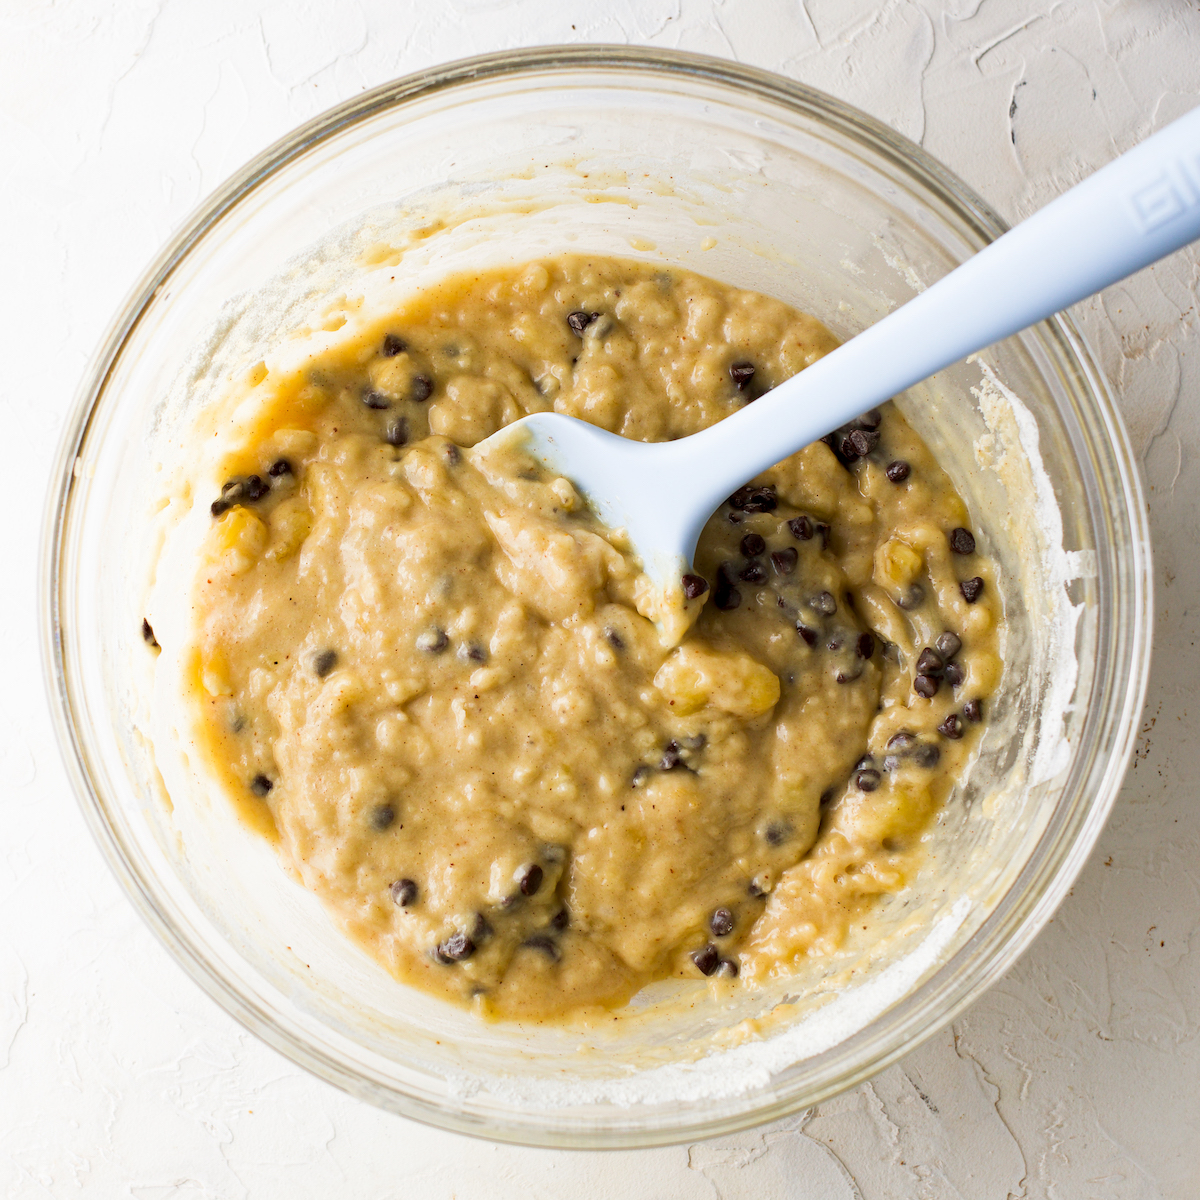 A close  up of a glass bowl with banana chocolate chip muffin batter.